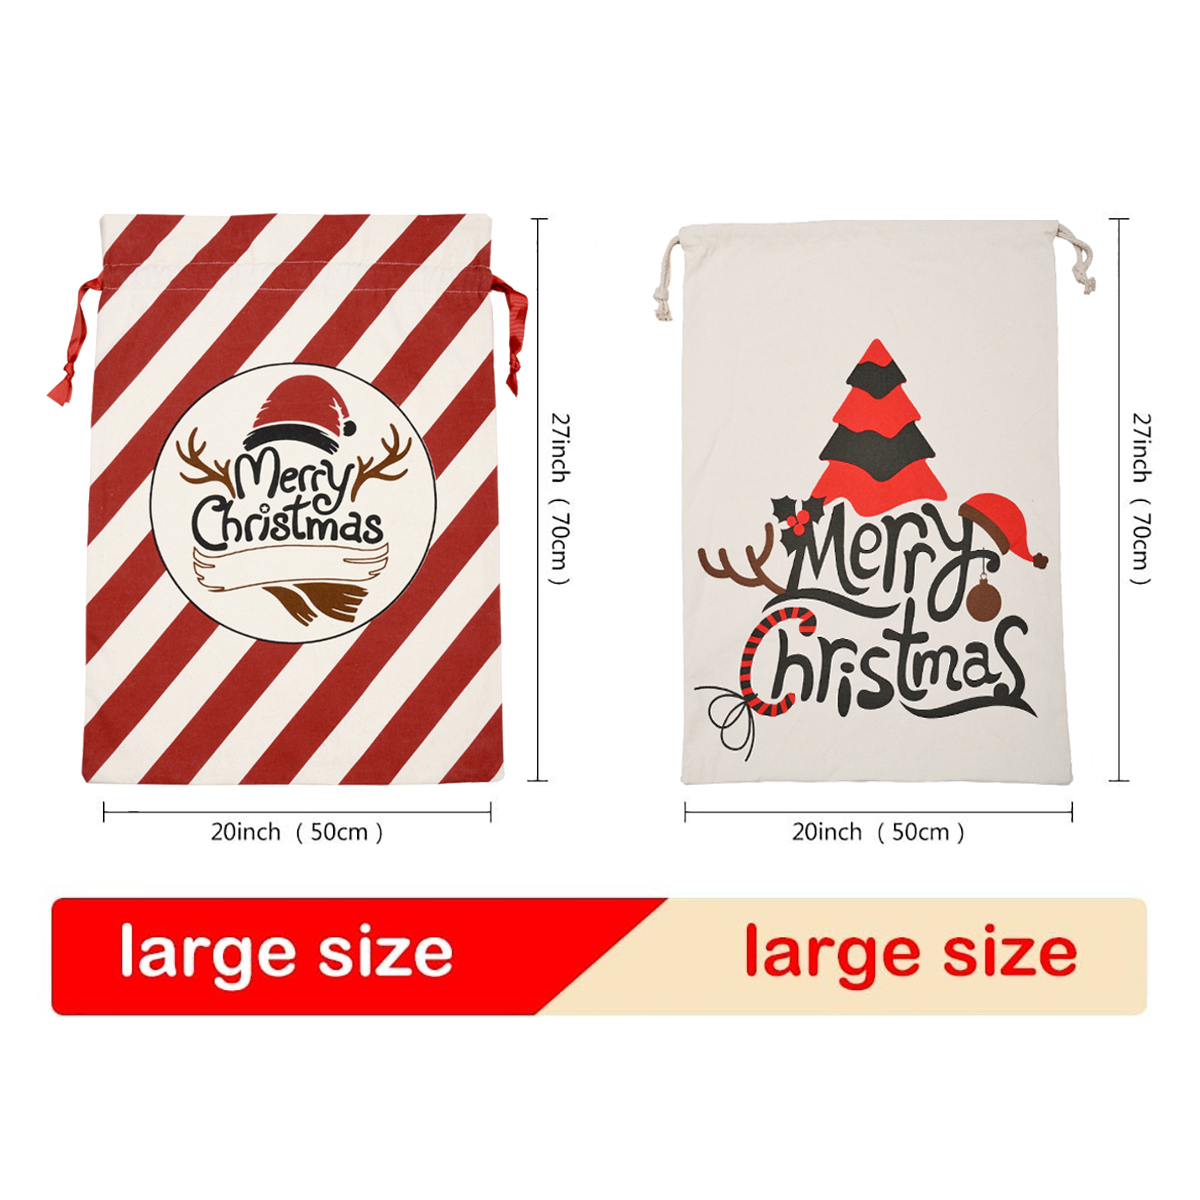 Santa-Sack-Canvas-Bag-Party-Christmas-Candy-Bags-Xmas-Decorations-for-Kids-Gift-1589089-10